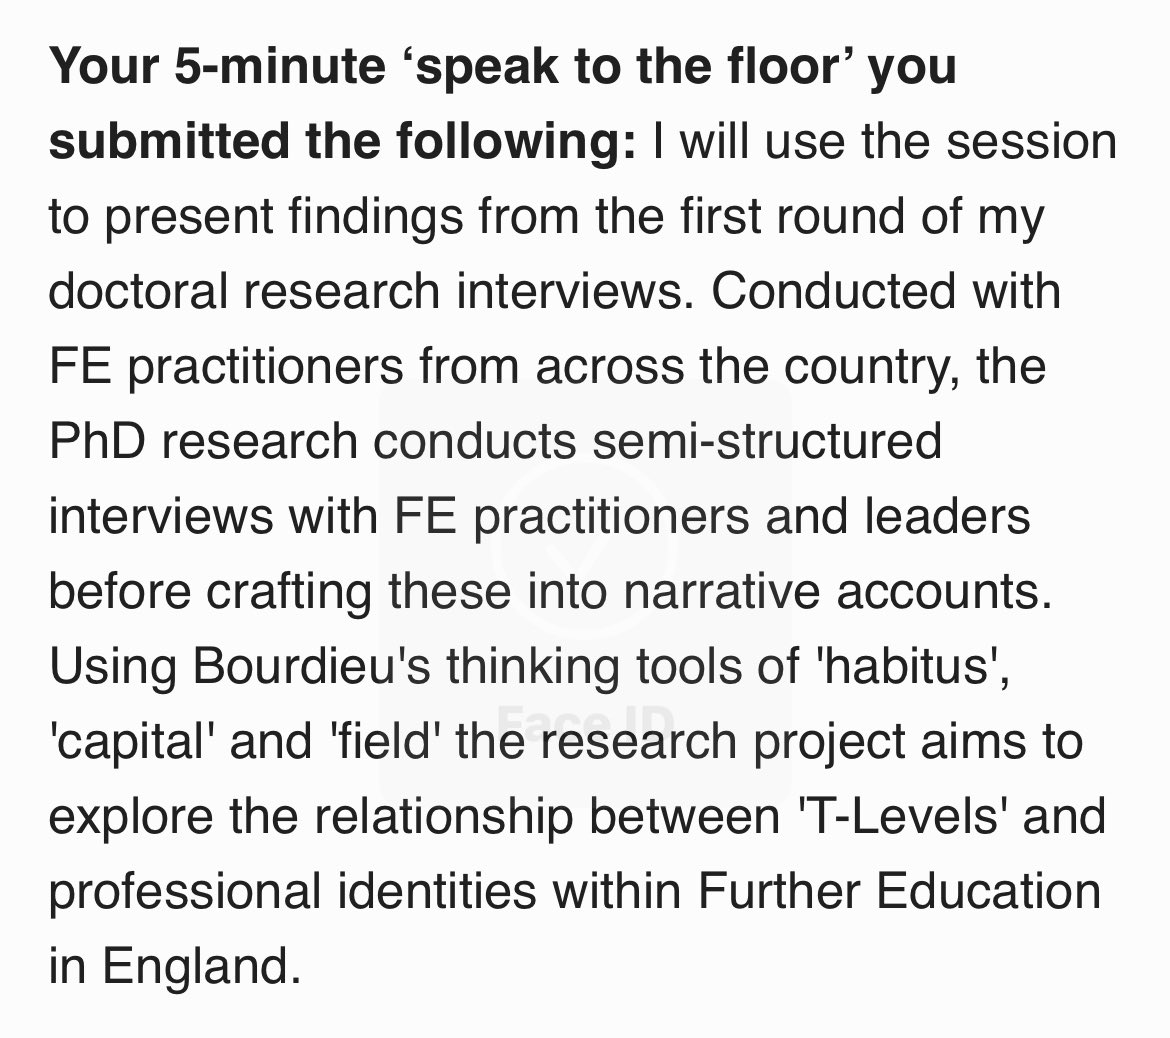 @LSRNetwork Delighted to have my submissions to the LSRN Conference ‘23 accepted. You can check out below the blurb for my 20-minute panel session and 5 minute ‘speak to the floor’ session on my doctoral research #feresearch @AmplifyFE @BelmasPost16 @BeraPostcomp #FE